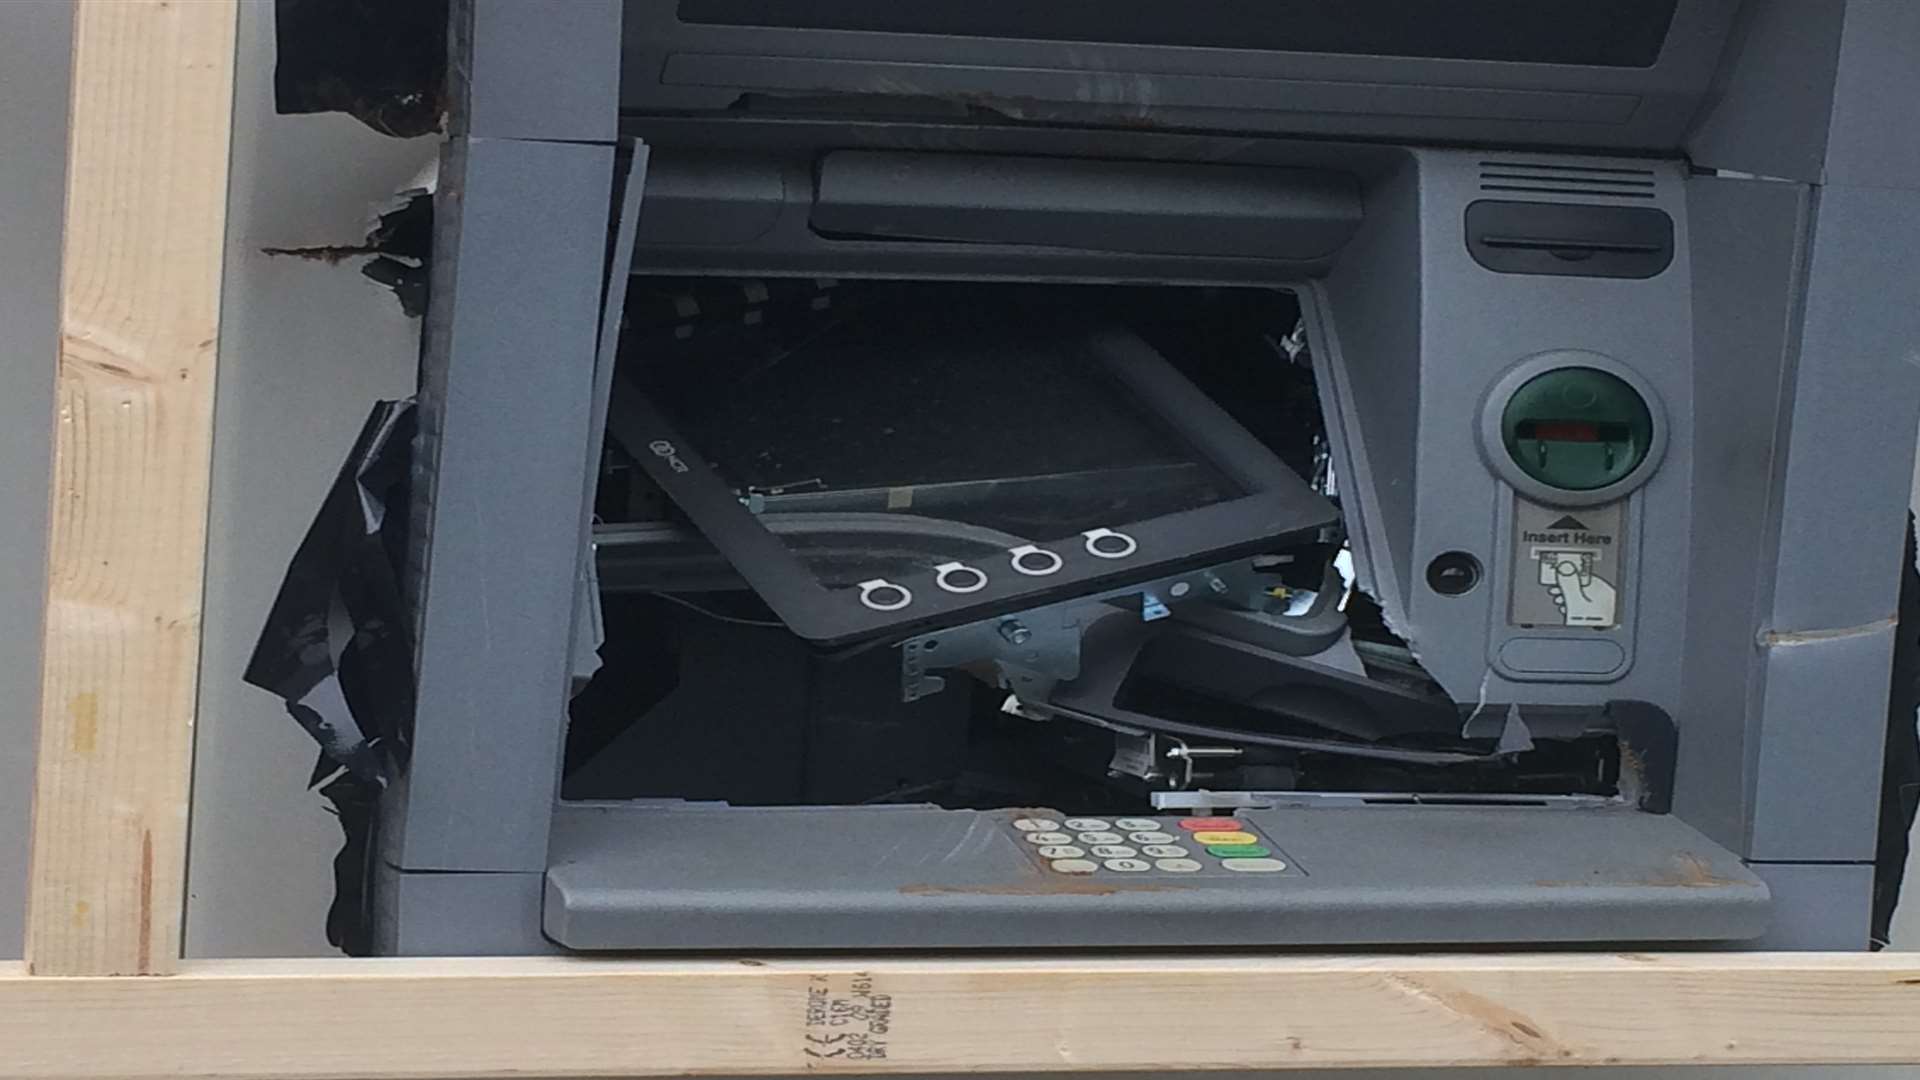 The cash machine was damaged in an early morning raid